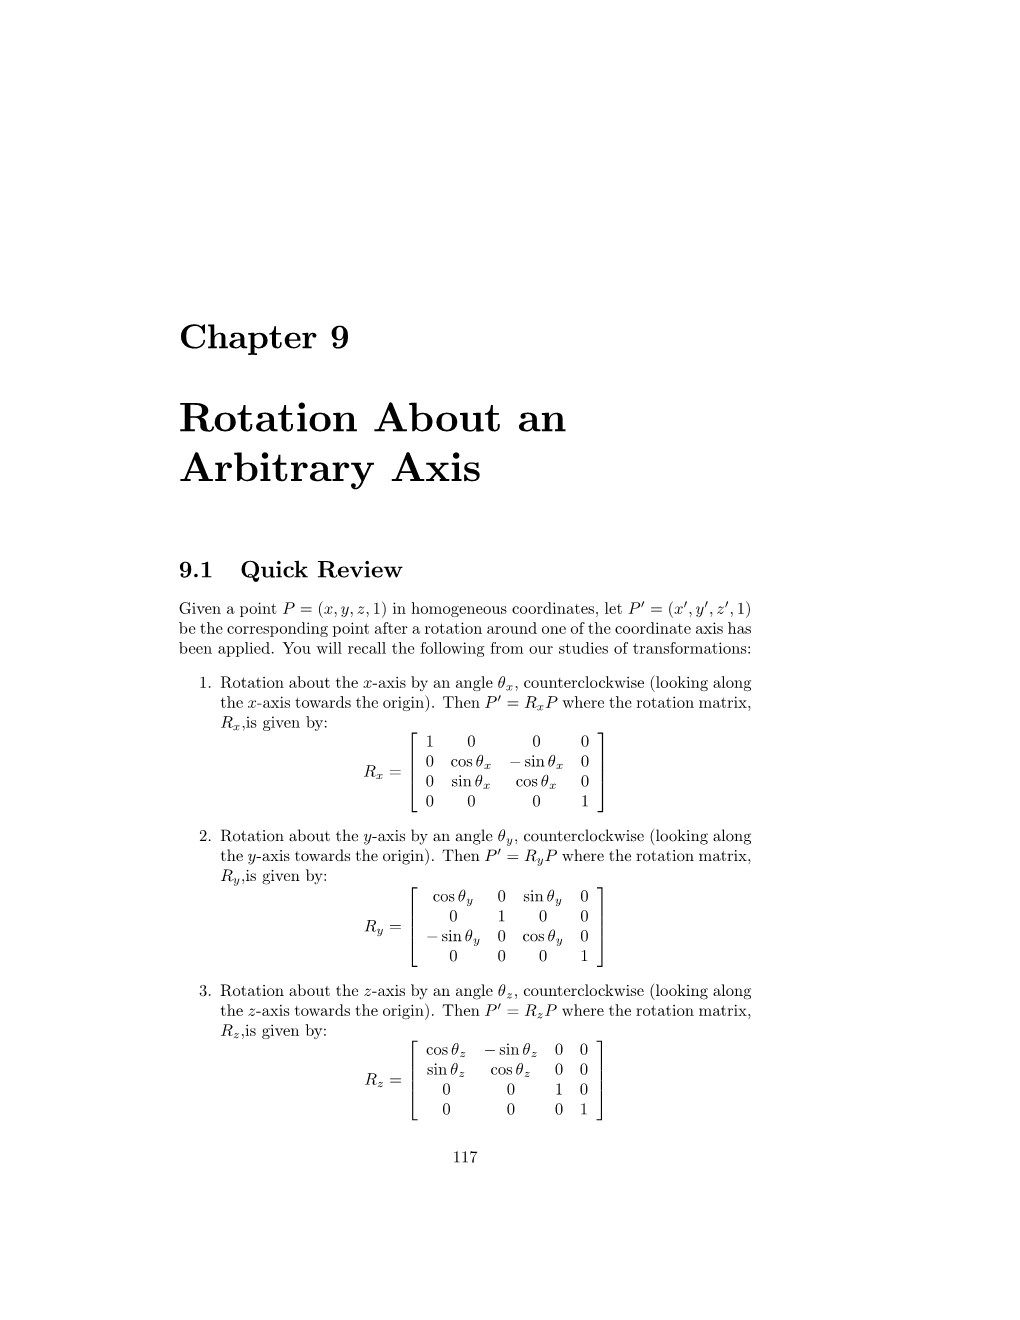 Rotation About an Arbitrary Axis